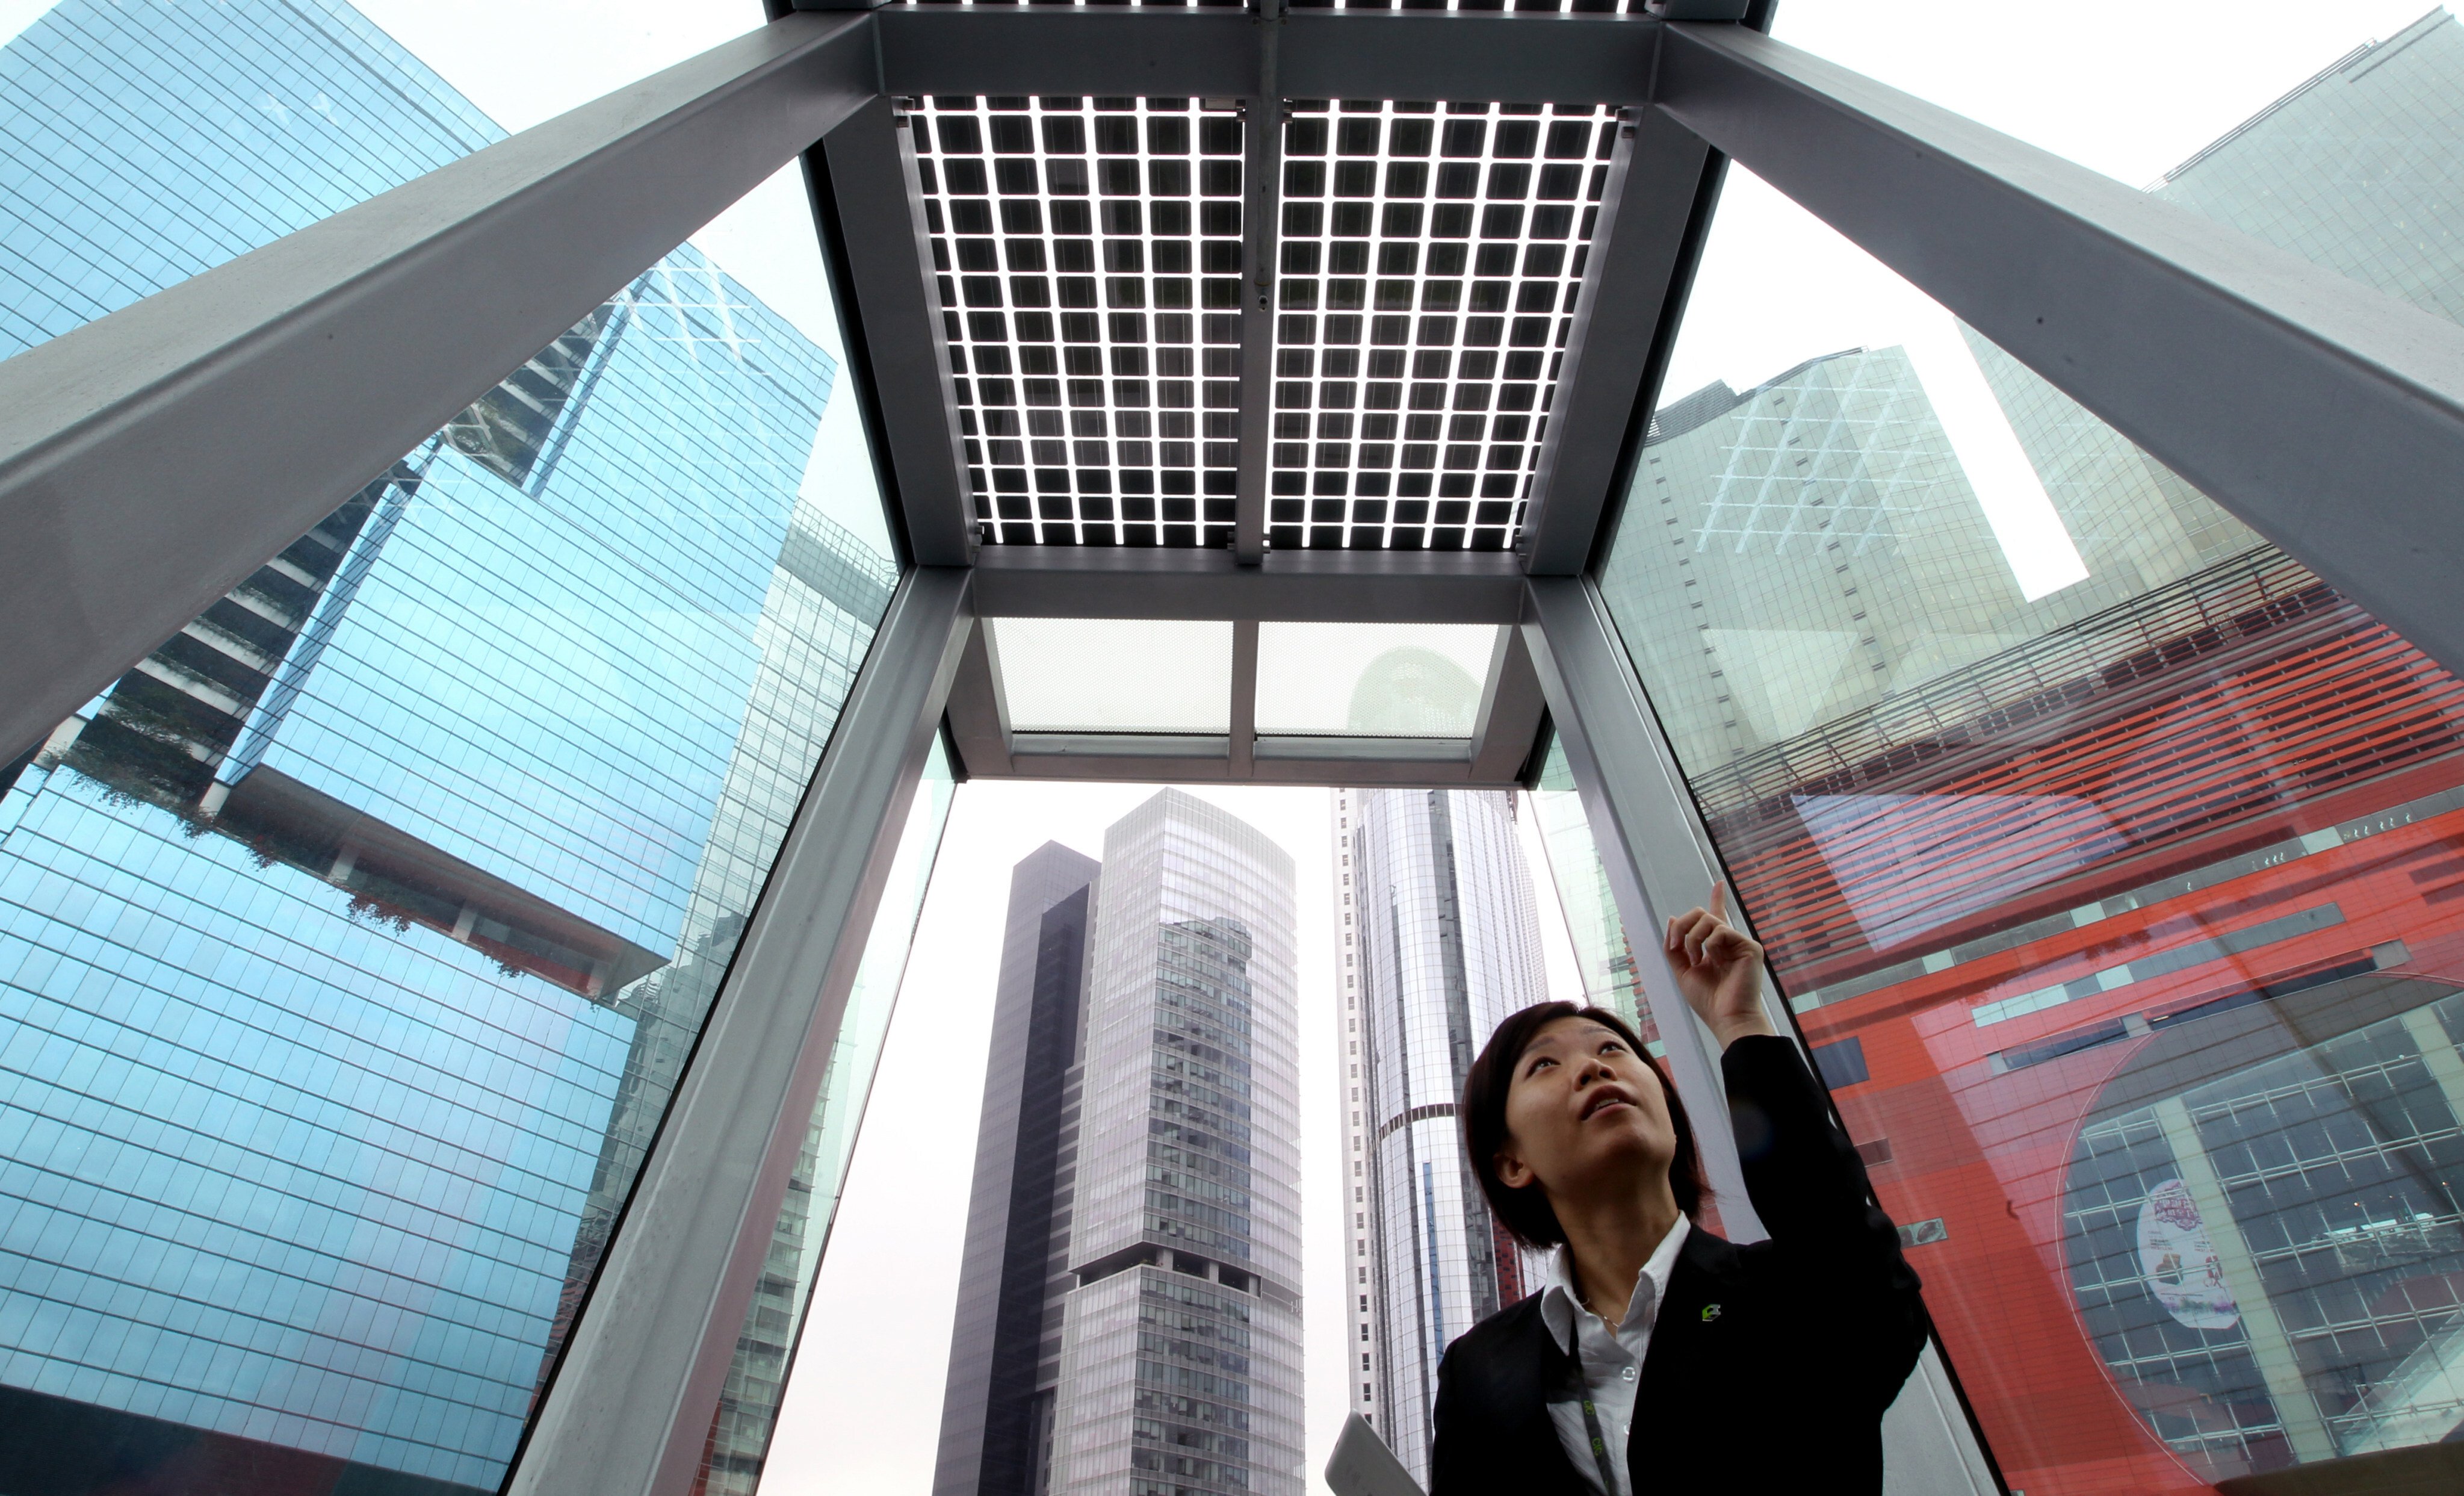 A customer service representative points to a solar panel at Hong Kong’s first zero carbon building, at 8 Sheung Yuet Road in Kowloon Bay, on its first day open to the public on December 17, 2012. Photo: Dickson Lee